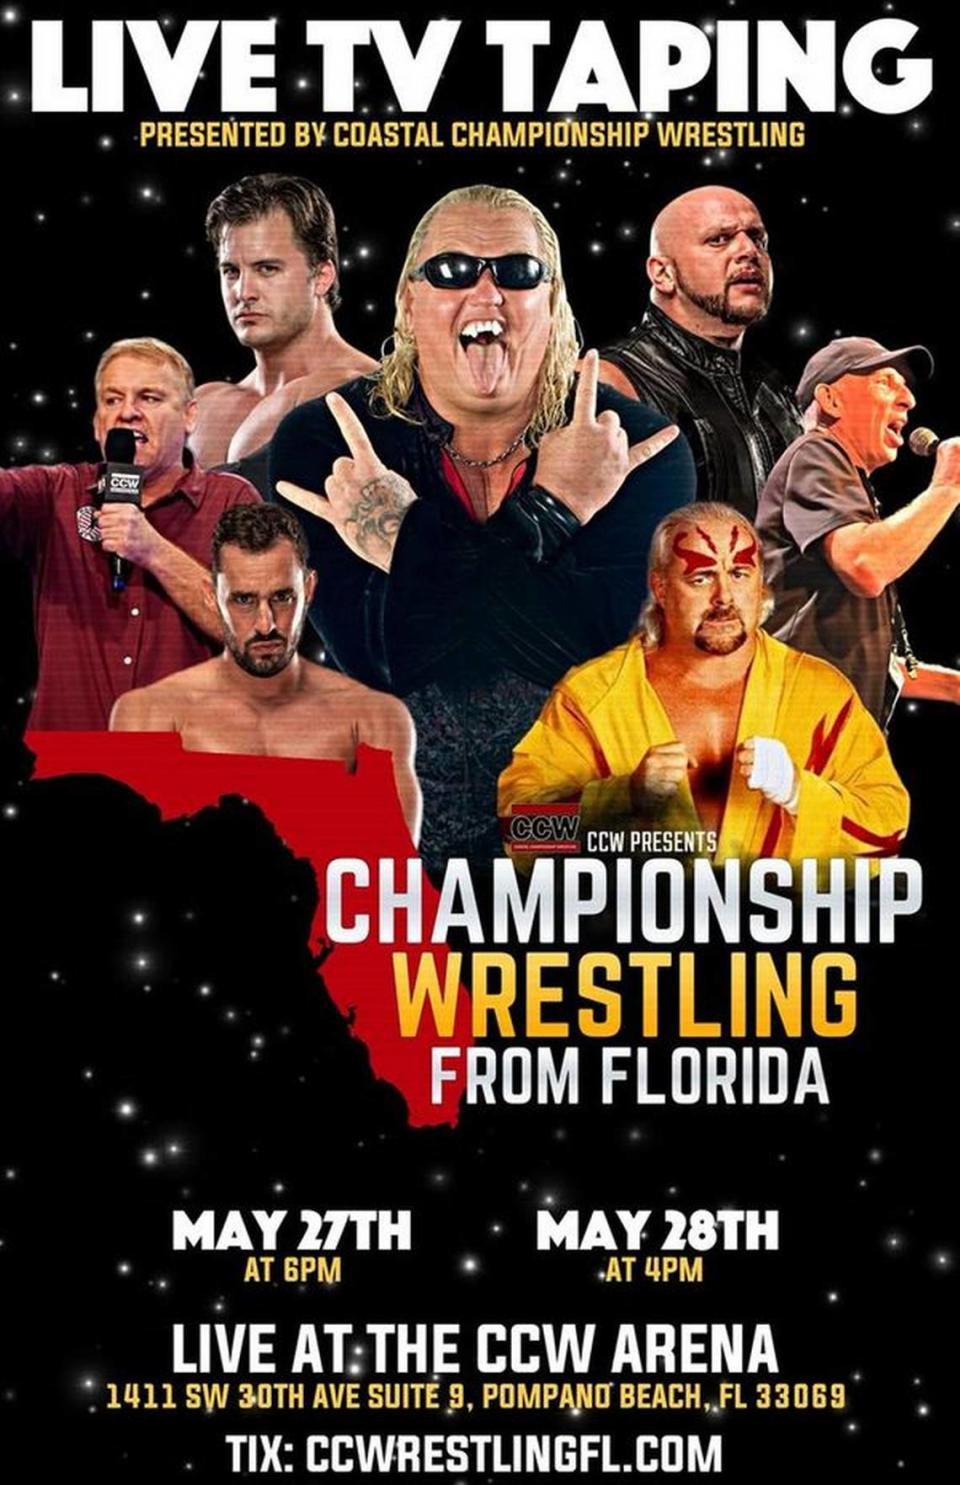 CWF TV tapings are May 27 and 28 at The CCW Arena at the CCW Training Center in Pompano Beach.